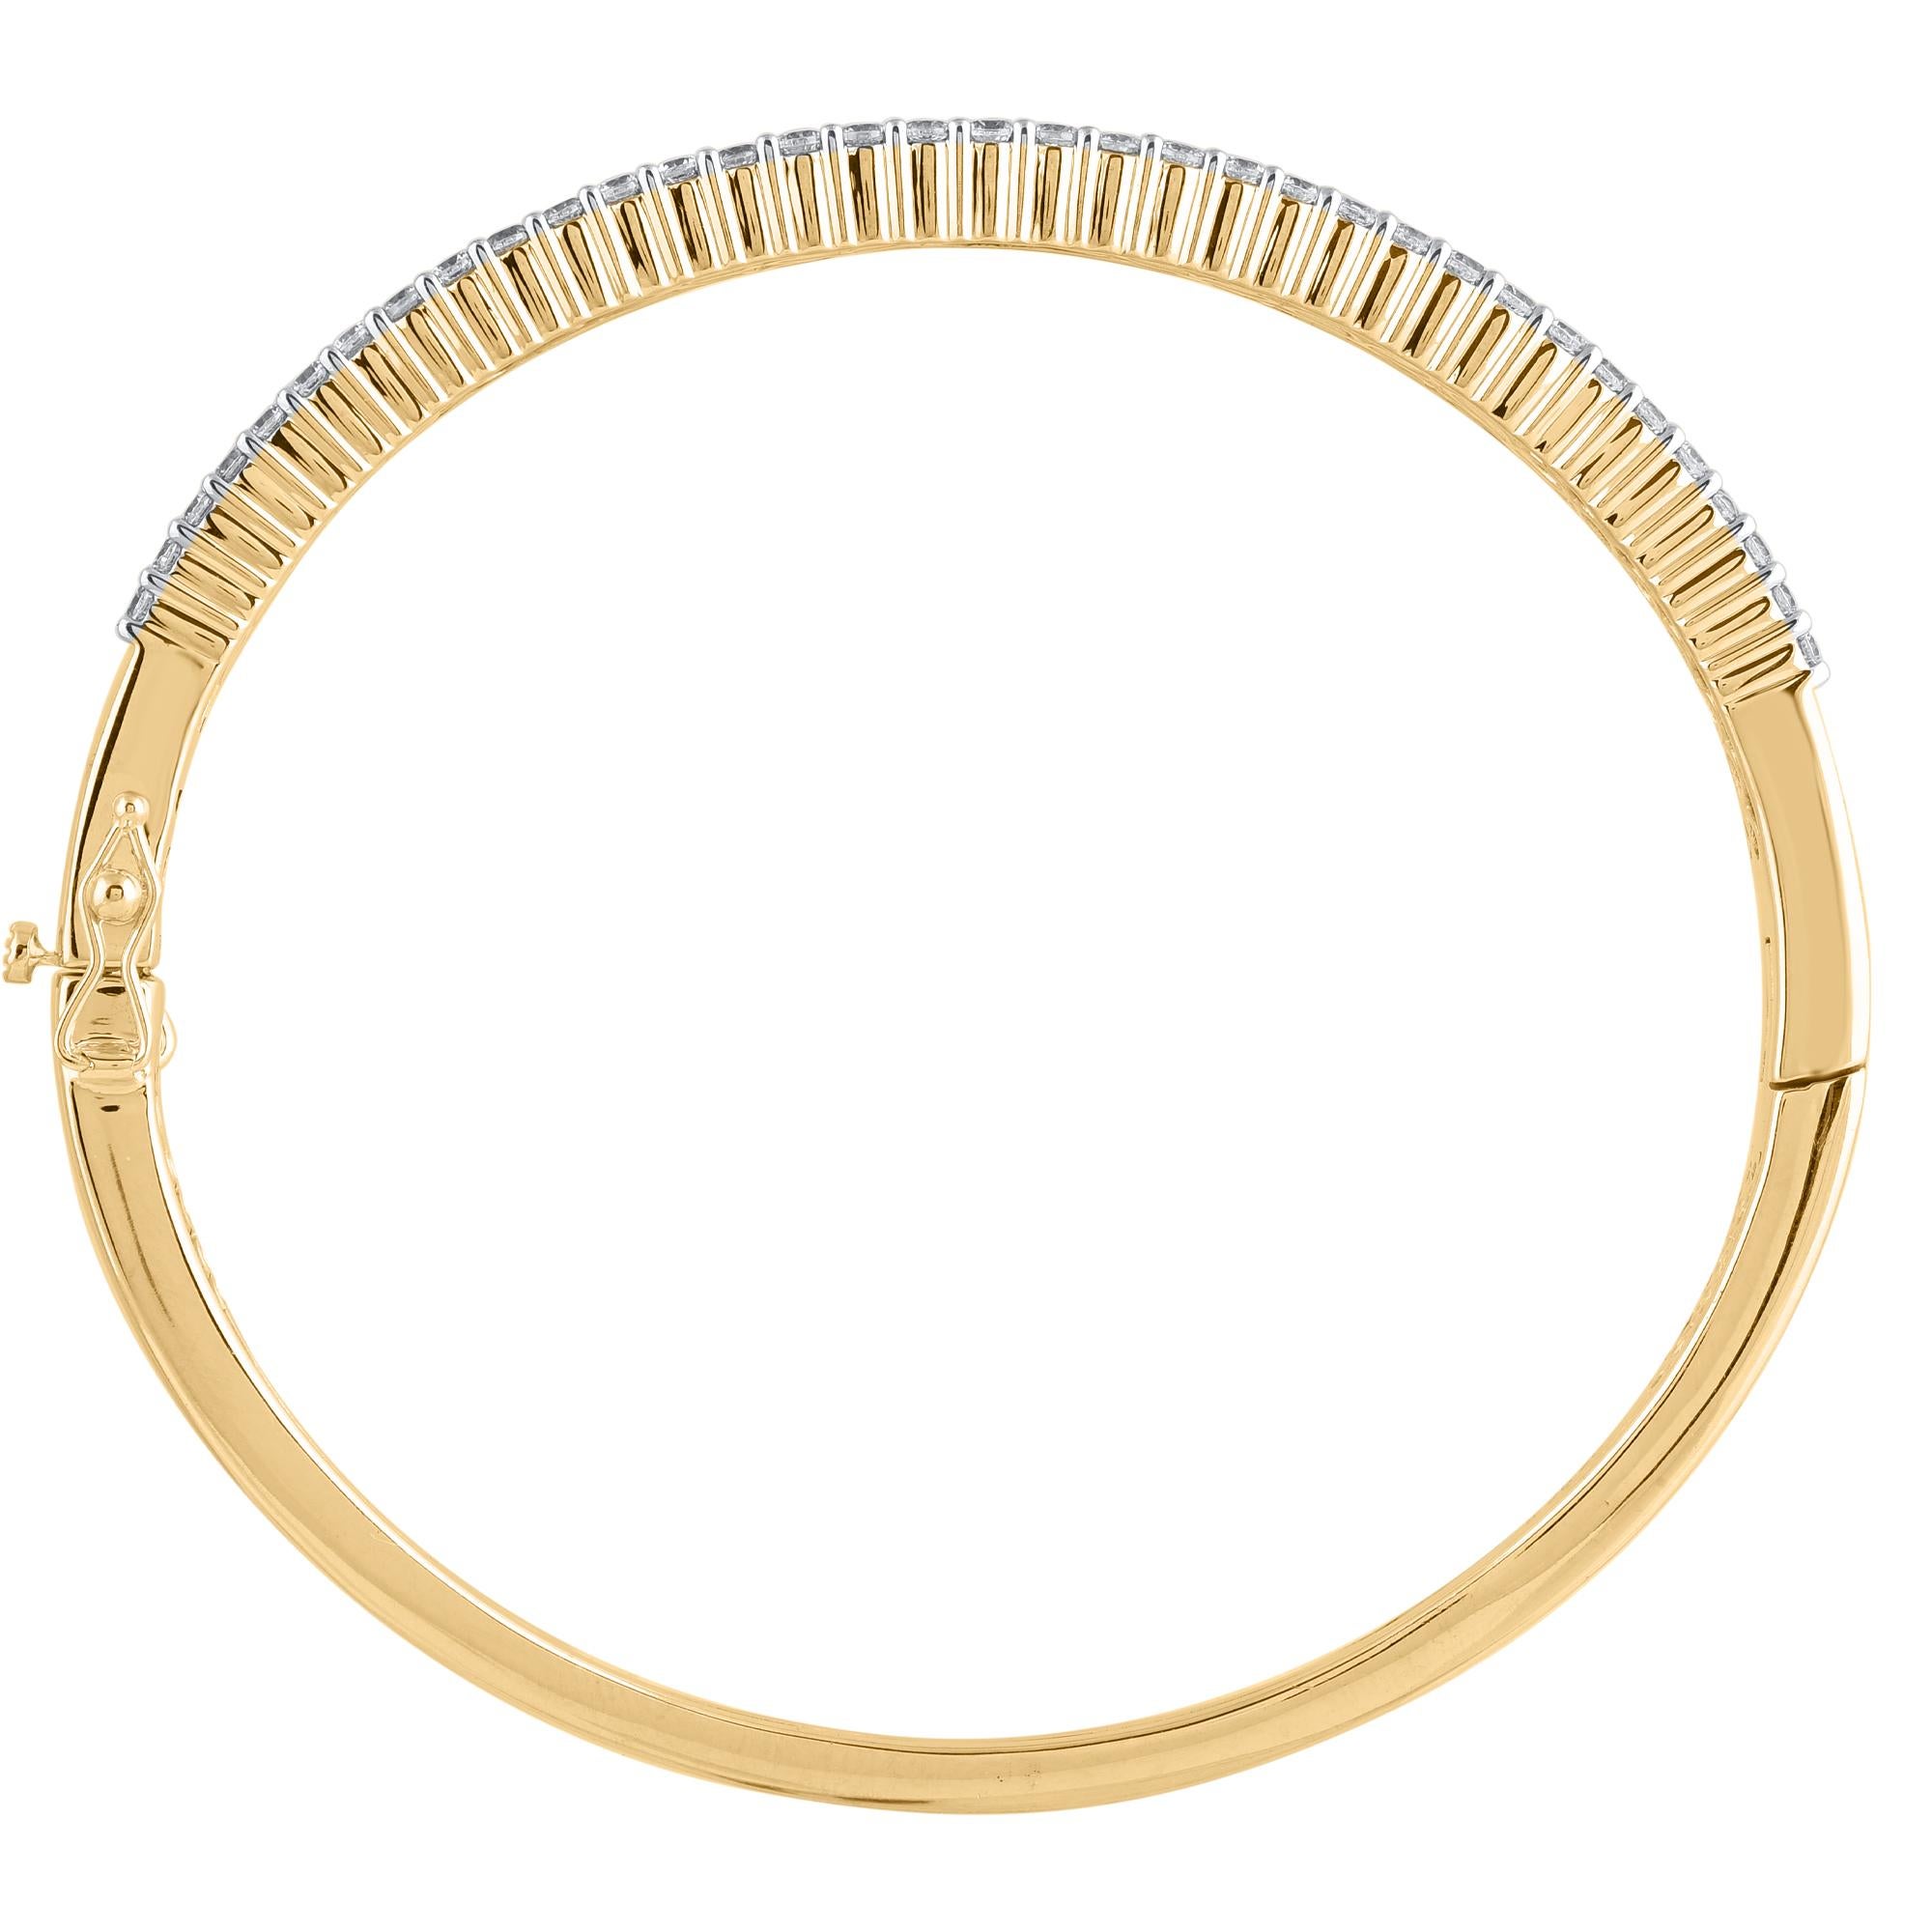 Modern TJD 5.0 Ct Natural Round & Baguette Diamond Bangle Bracelet in 18KT Yellow Gold For Sale